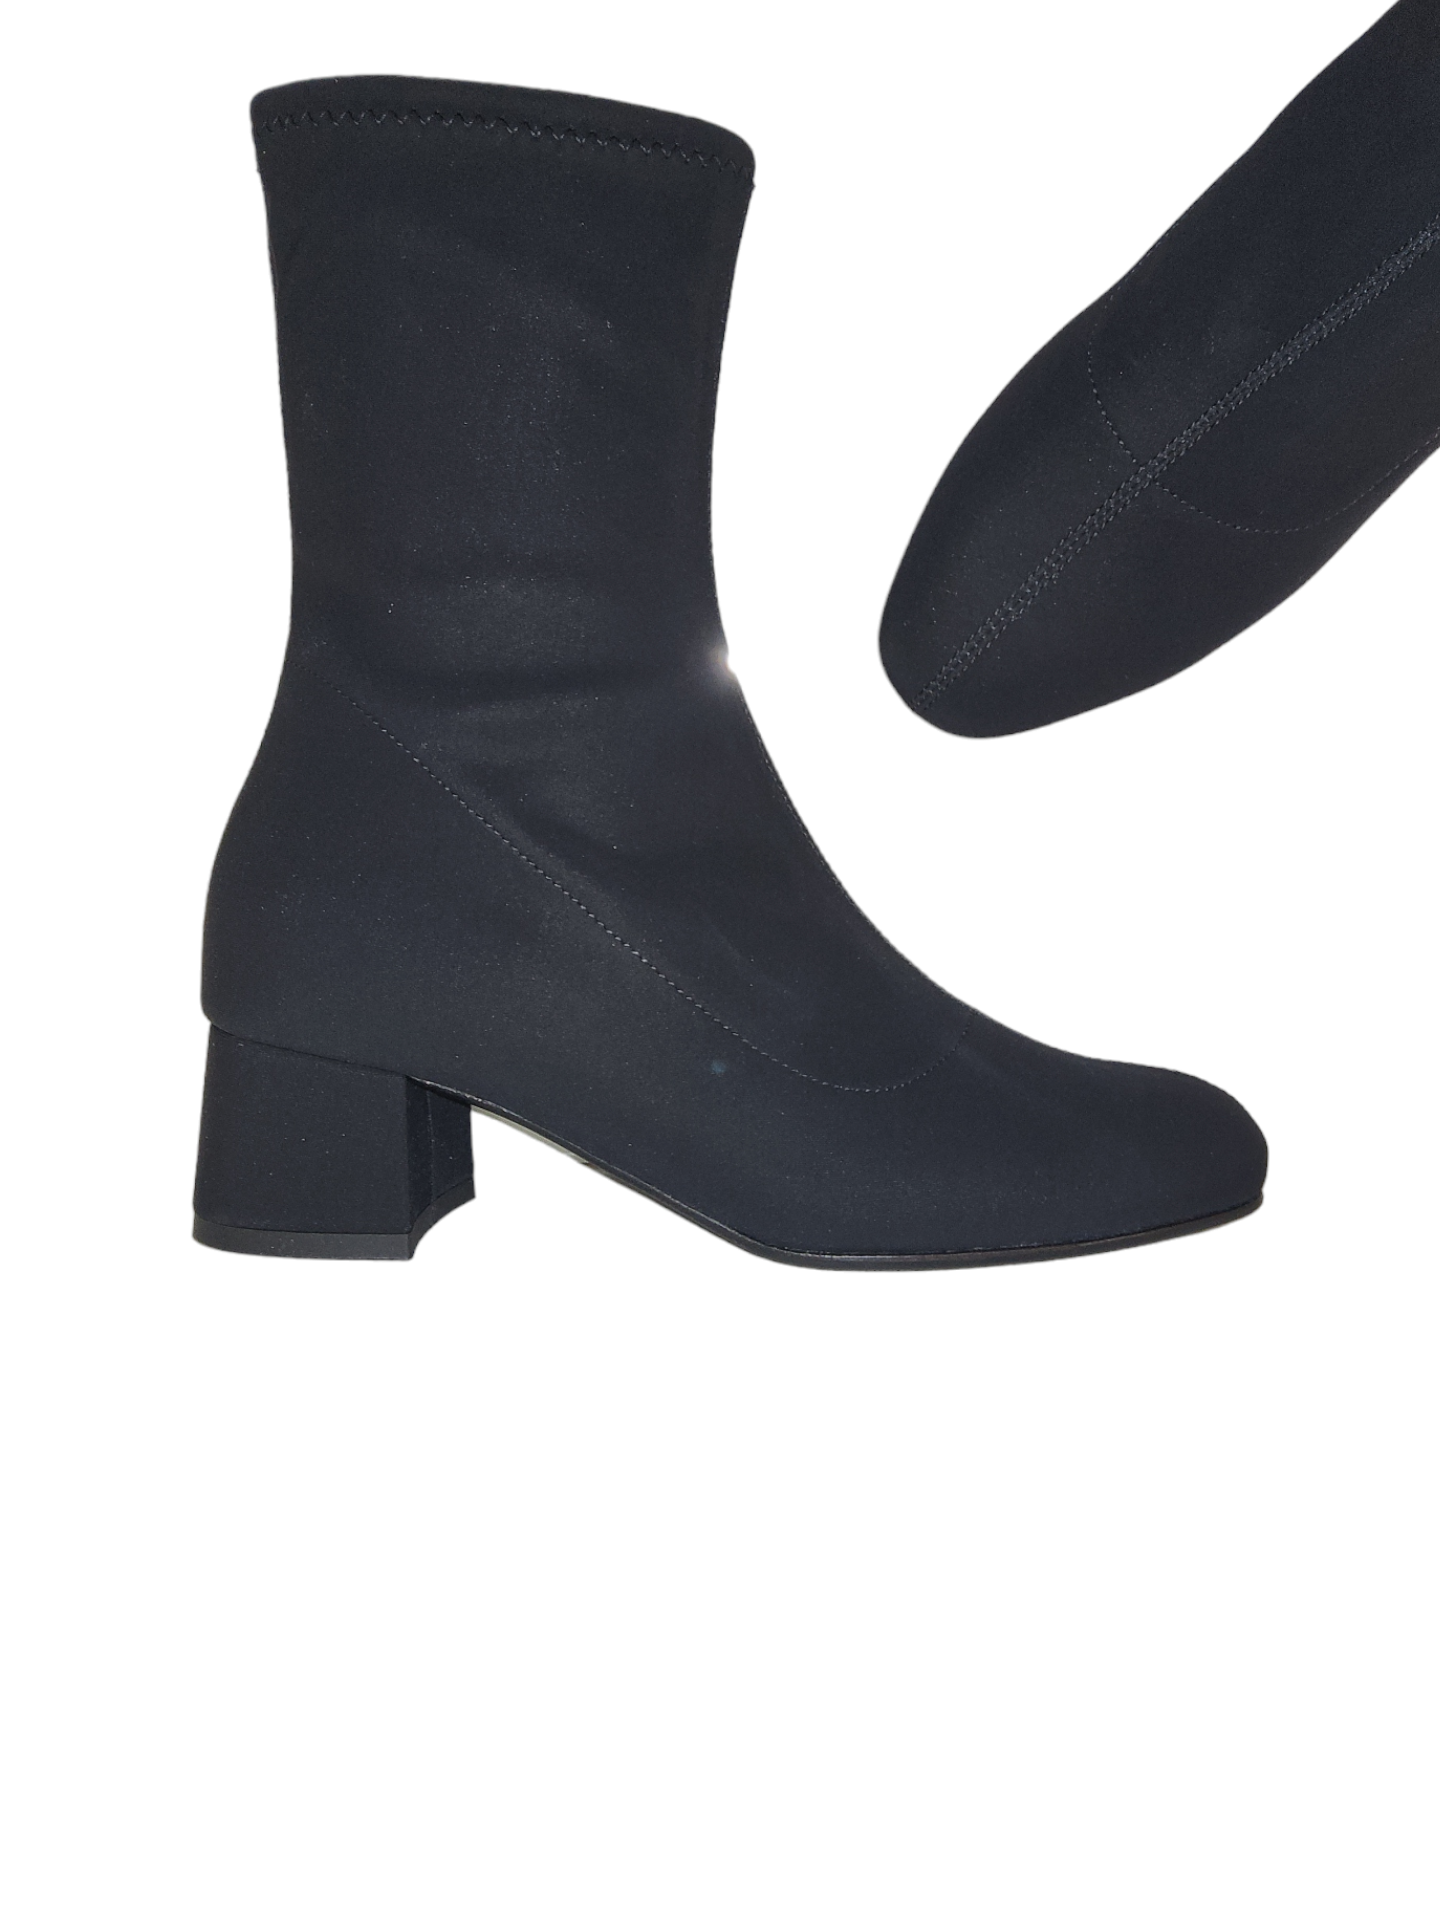 Black ankle boot